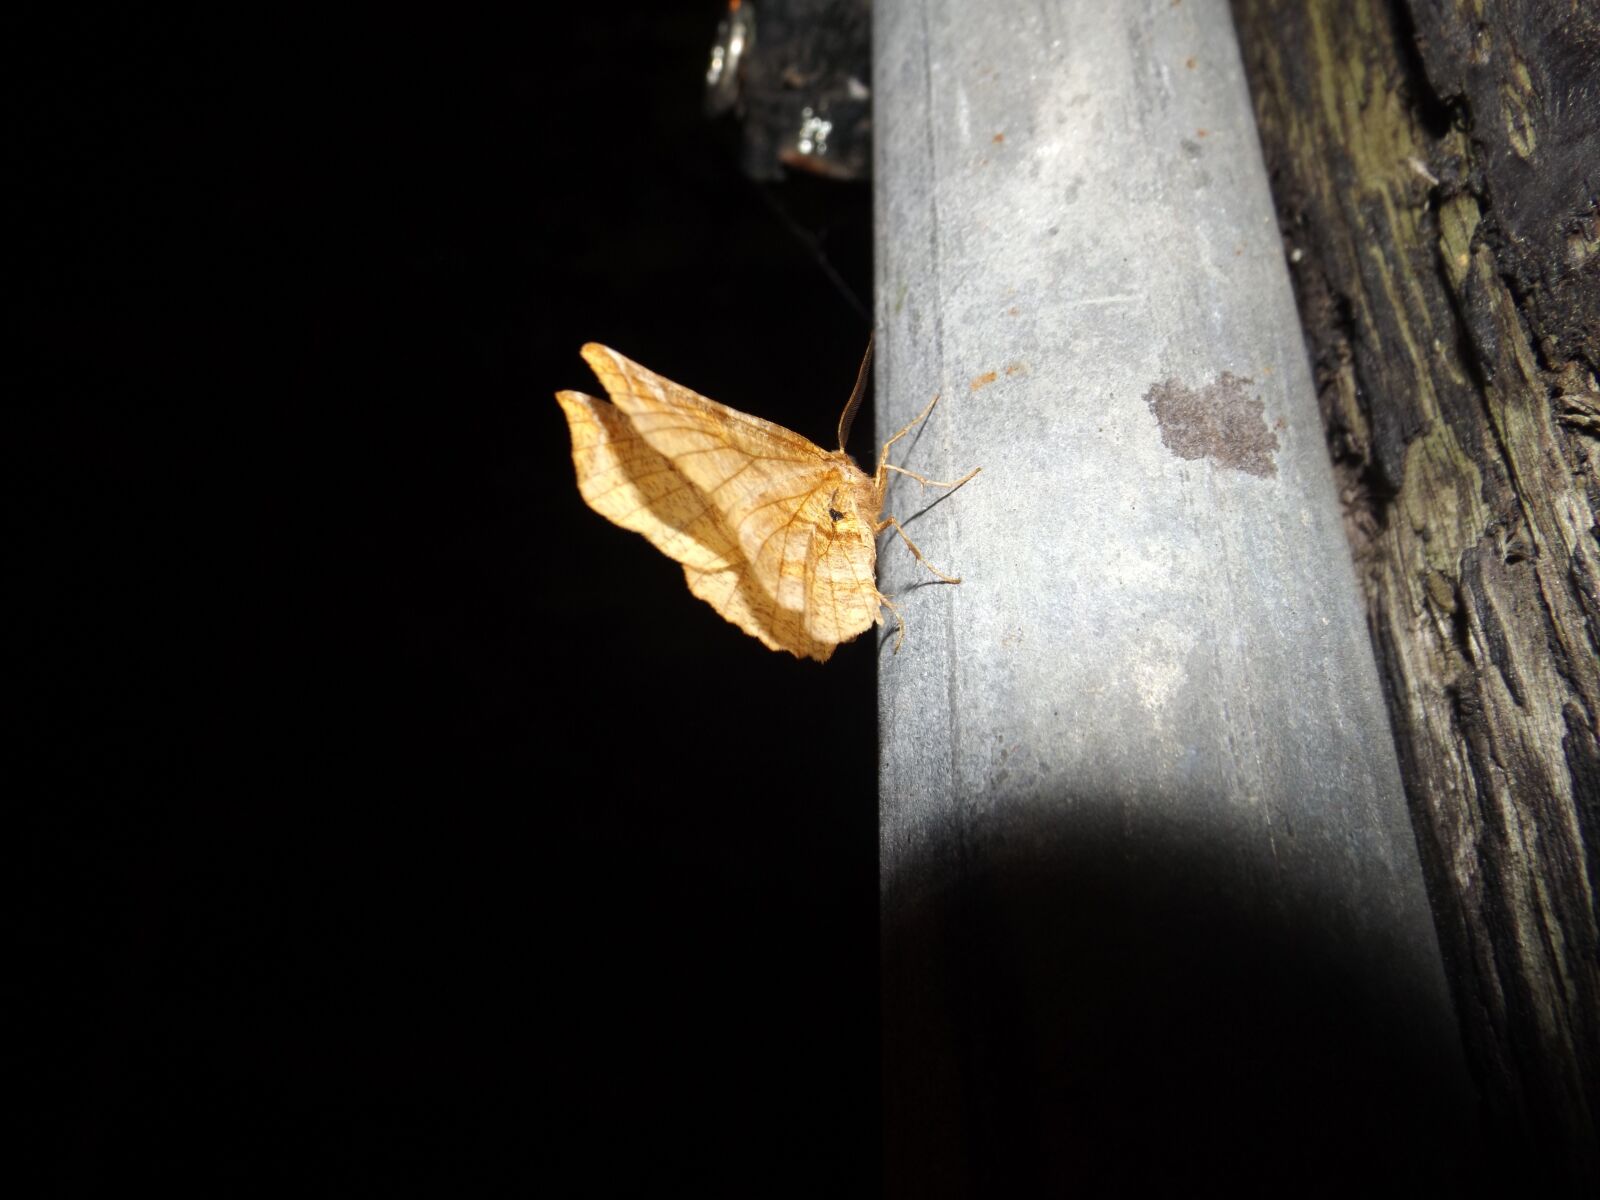 Fujifilm FinePix S4800 sample photo. Night, motte, insect photography